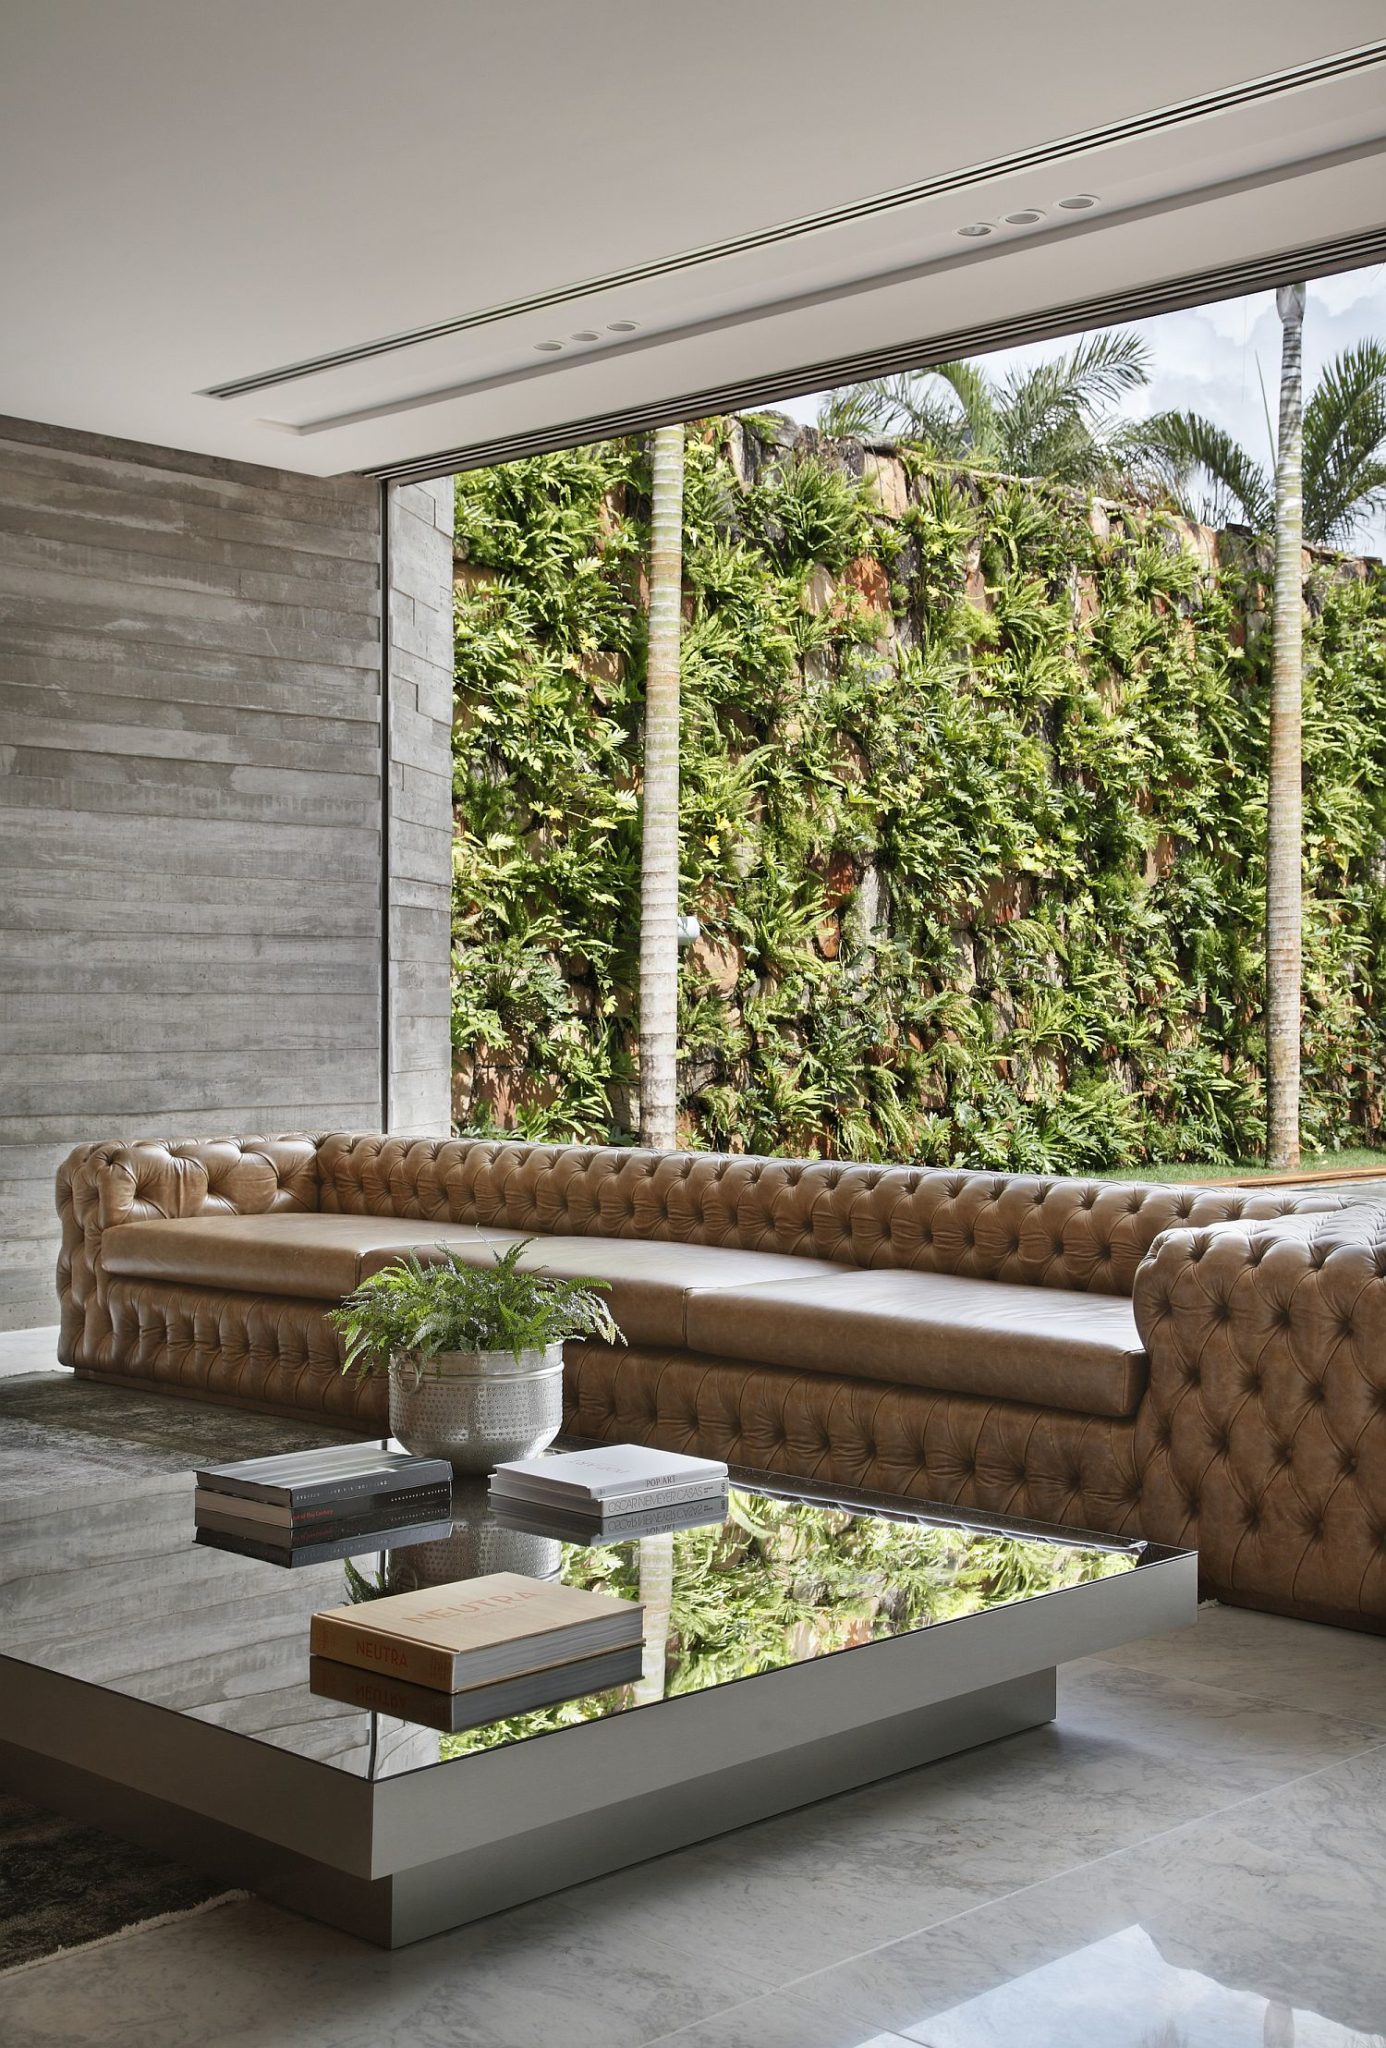 View of the living wall outside